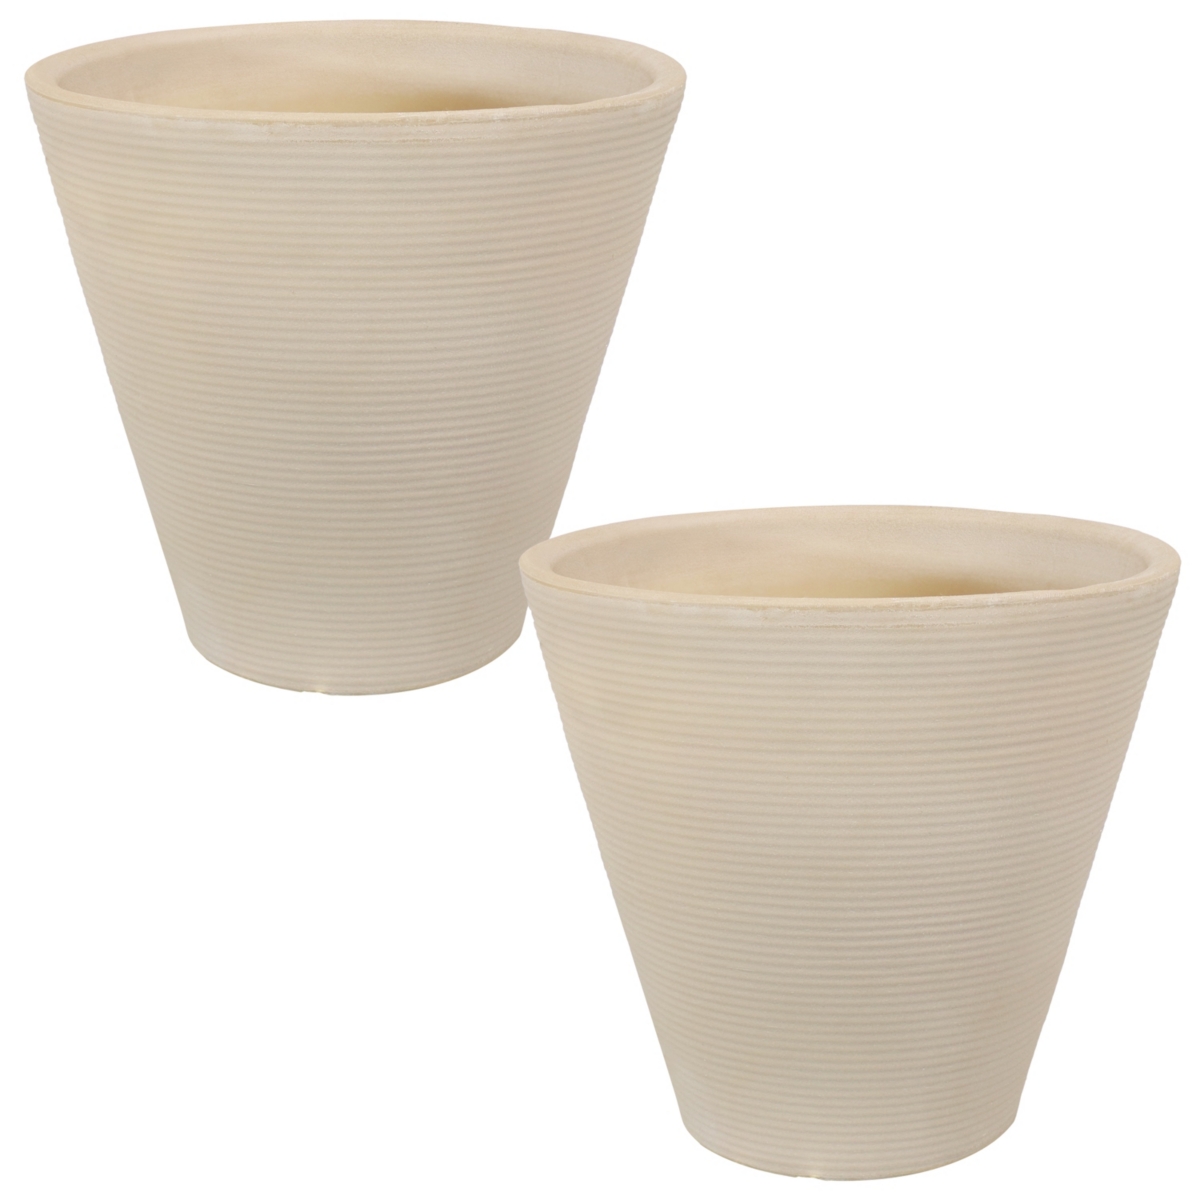 15.5 in Walter Dual-Wall Polyresin Planter - Beige - Set of 2 - Light brown